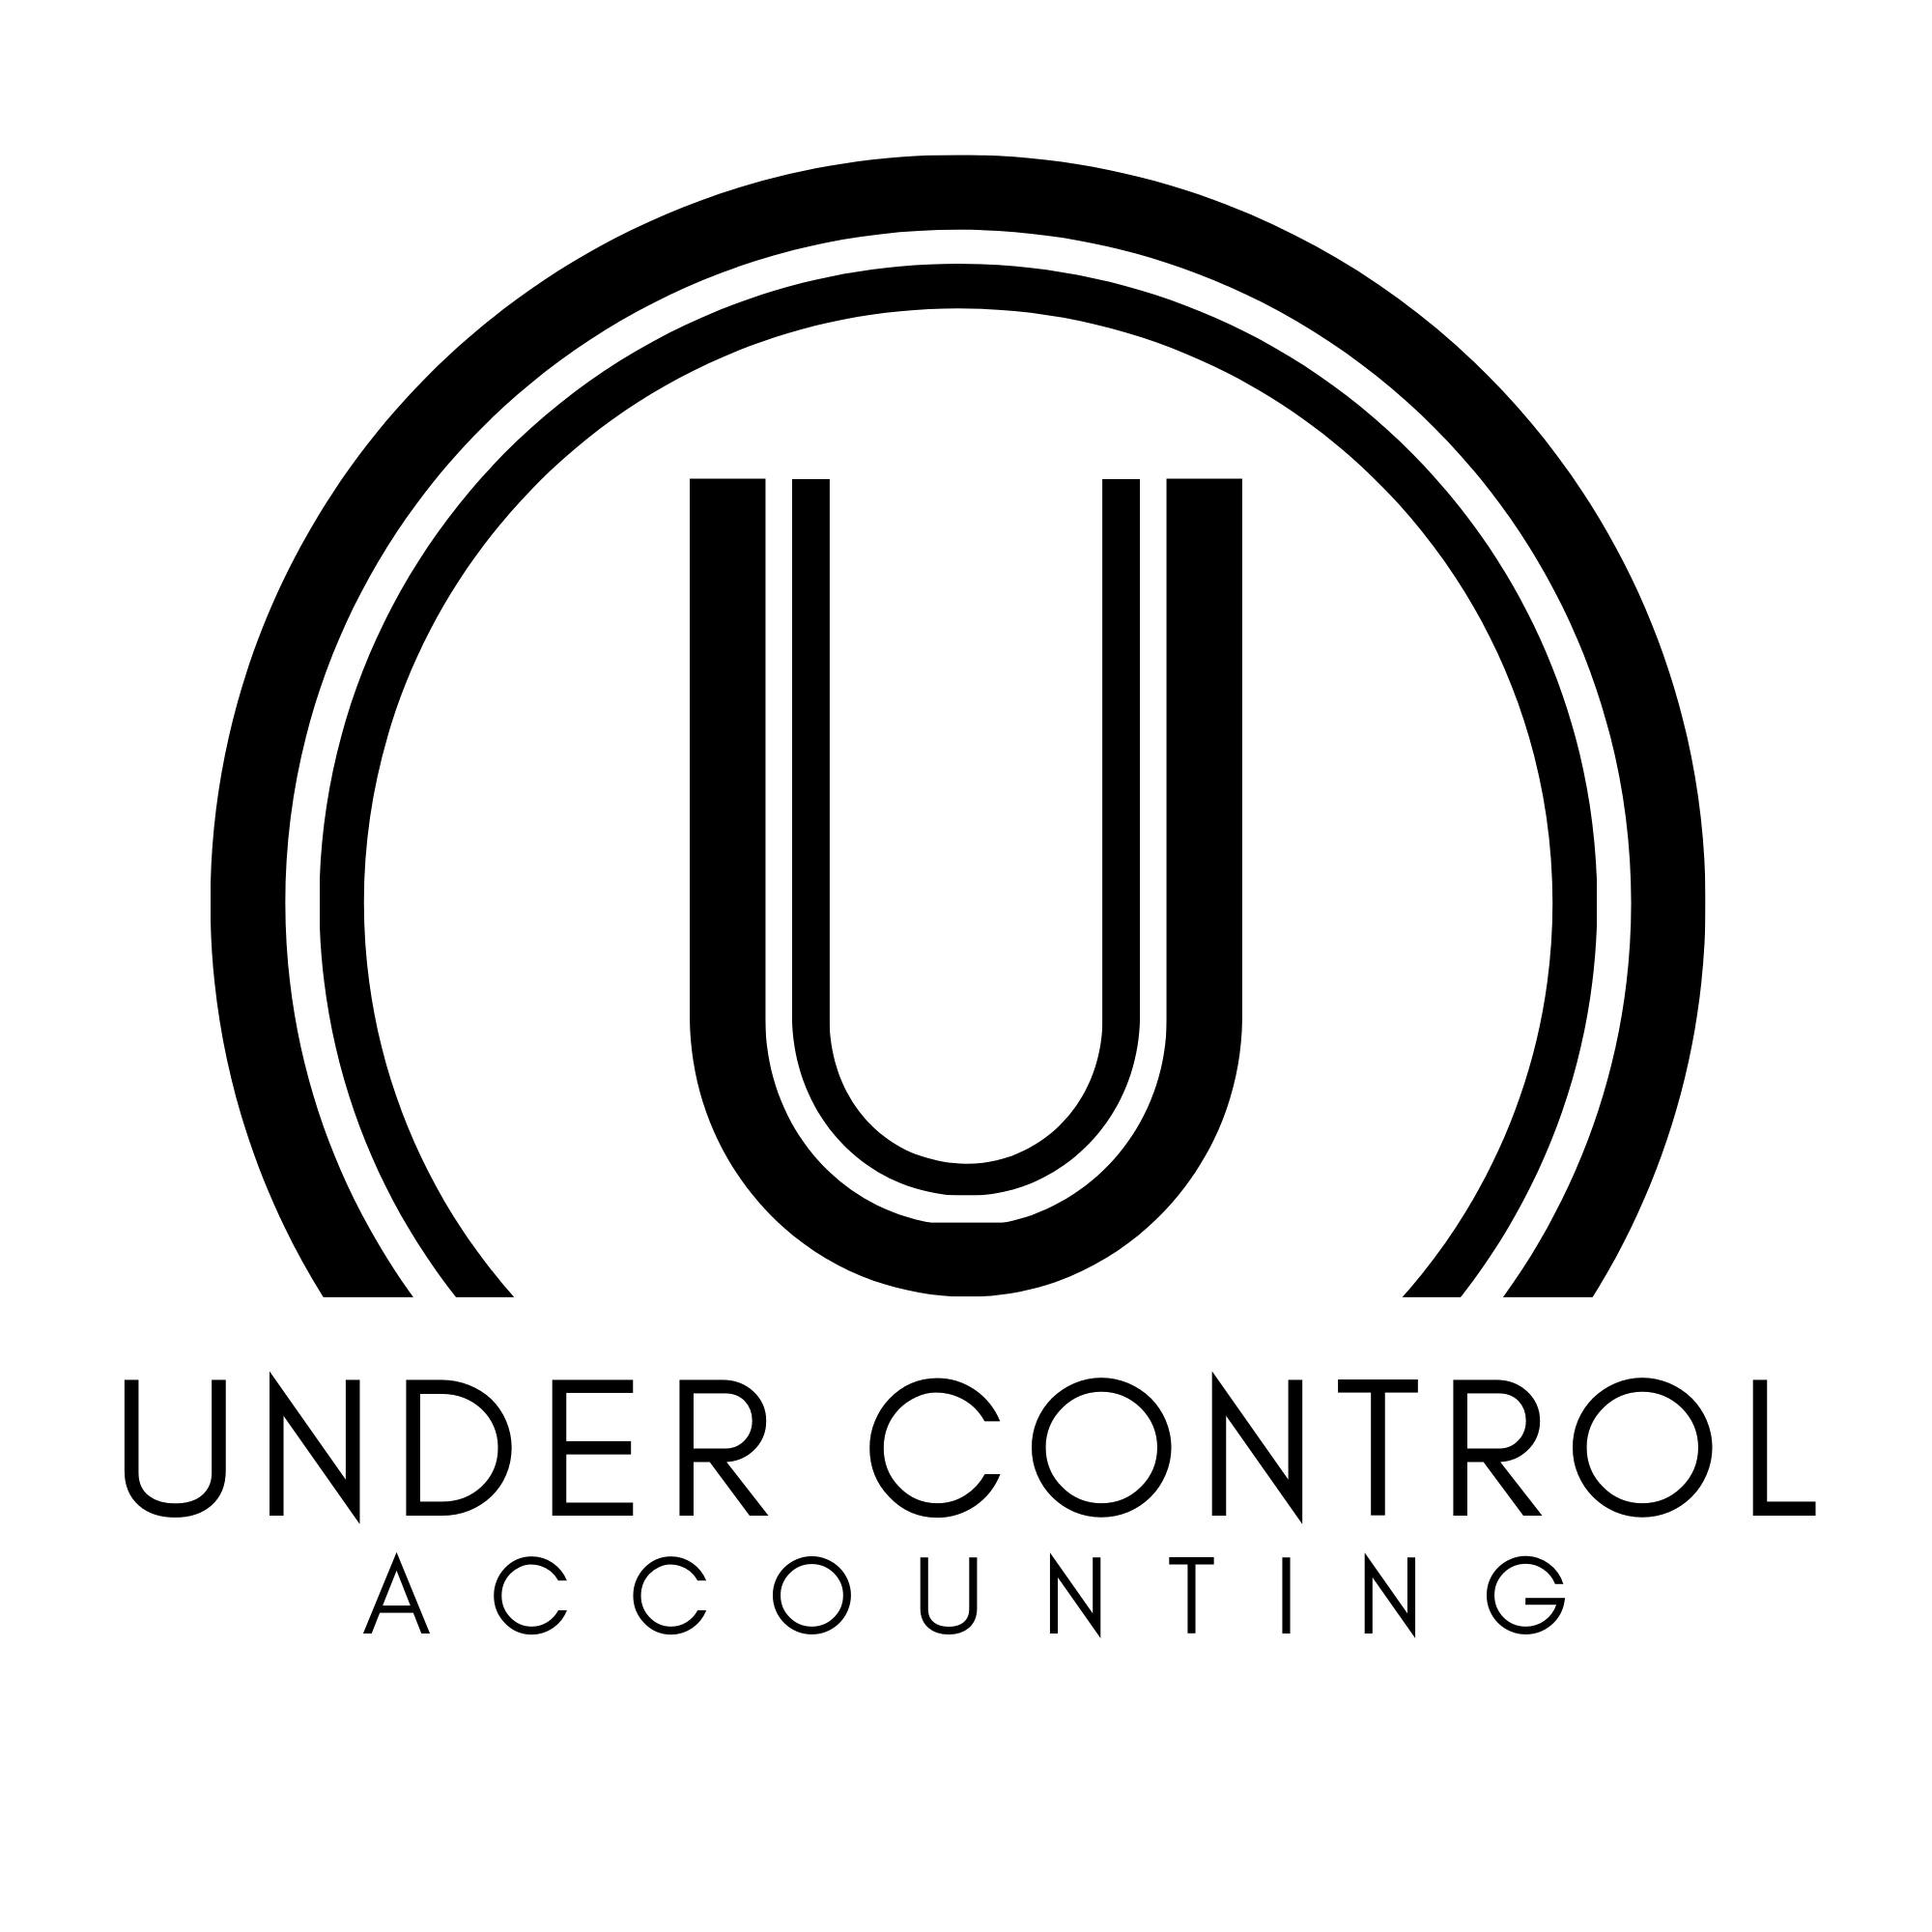 Under Control Accounting